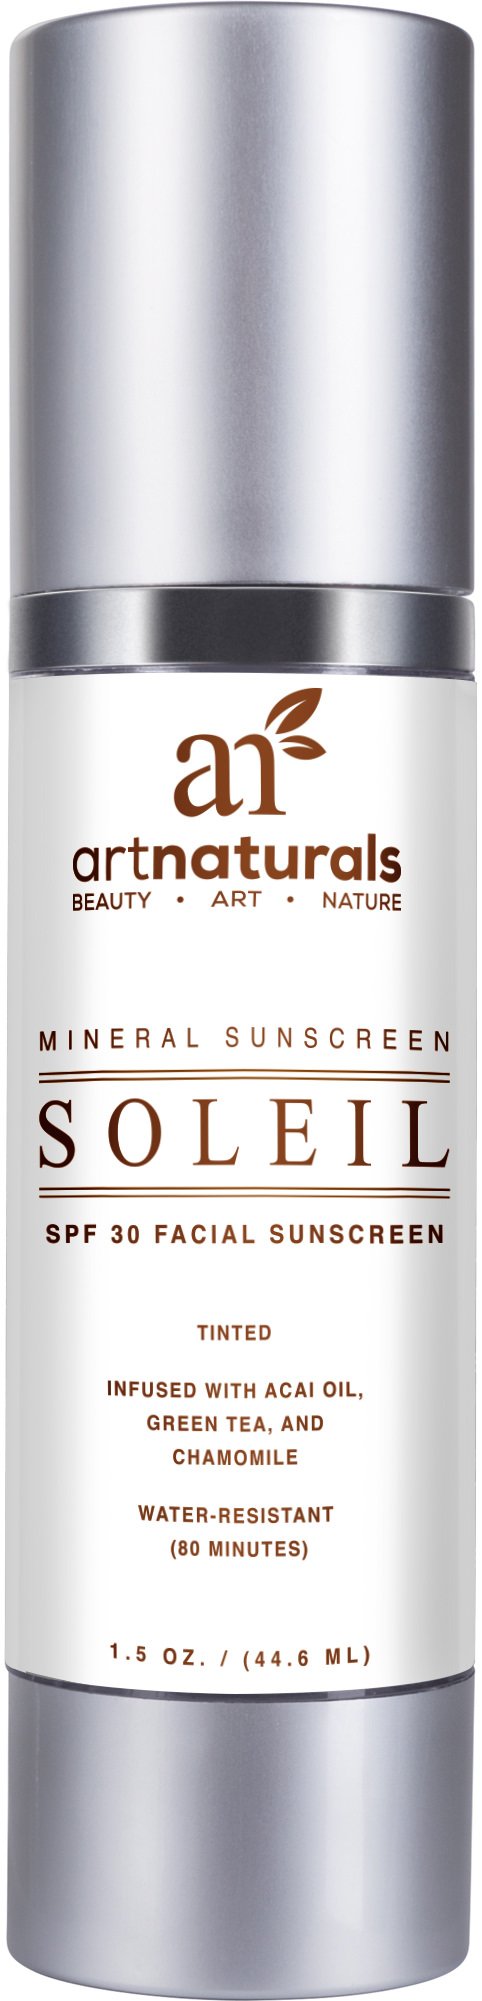 ArtNaturals Natural Facial Tinted Sunscreen – (1.5 Fl Oz / 45ml) – Soleil Broad Spectrum Moisturizer for Face – SPF 30 – Mineral and Jojoba Infused Lotion to Protect from Sun